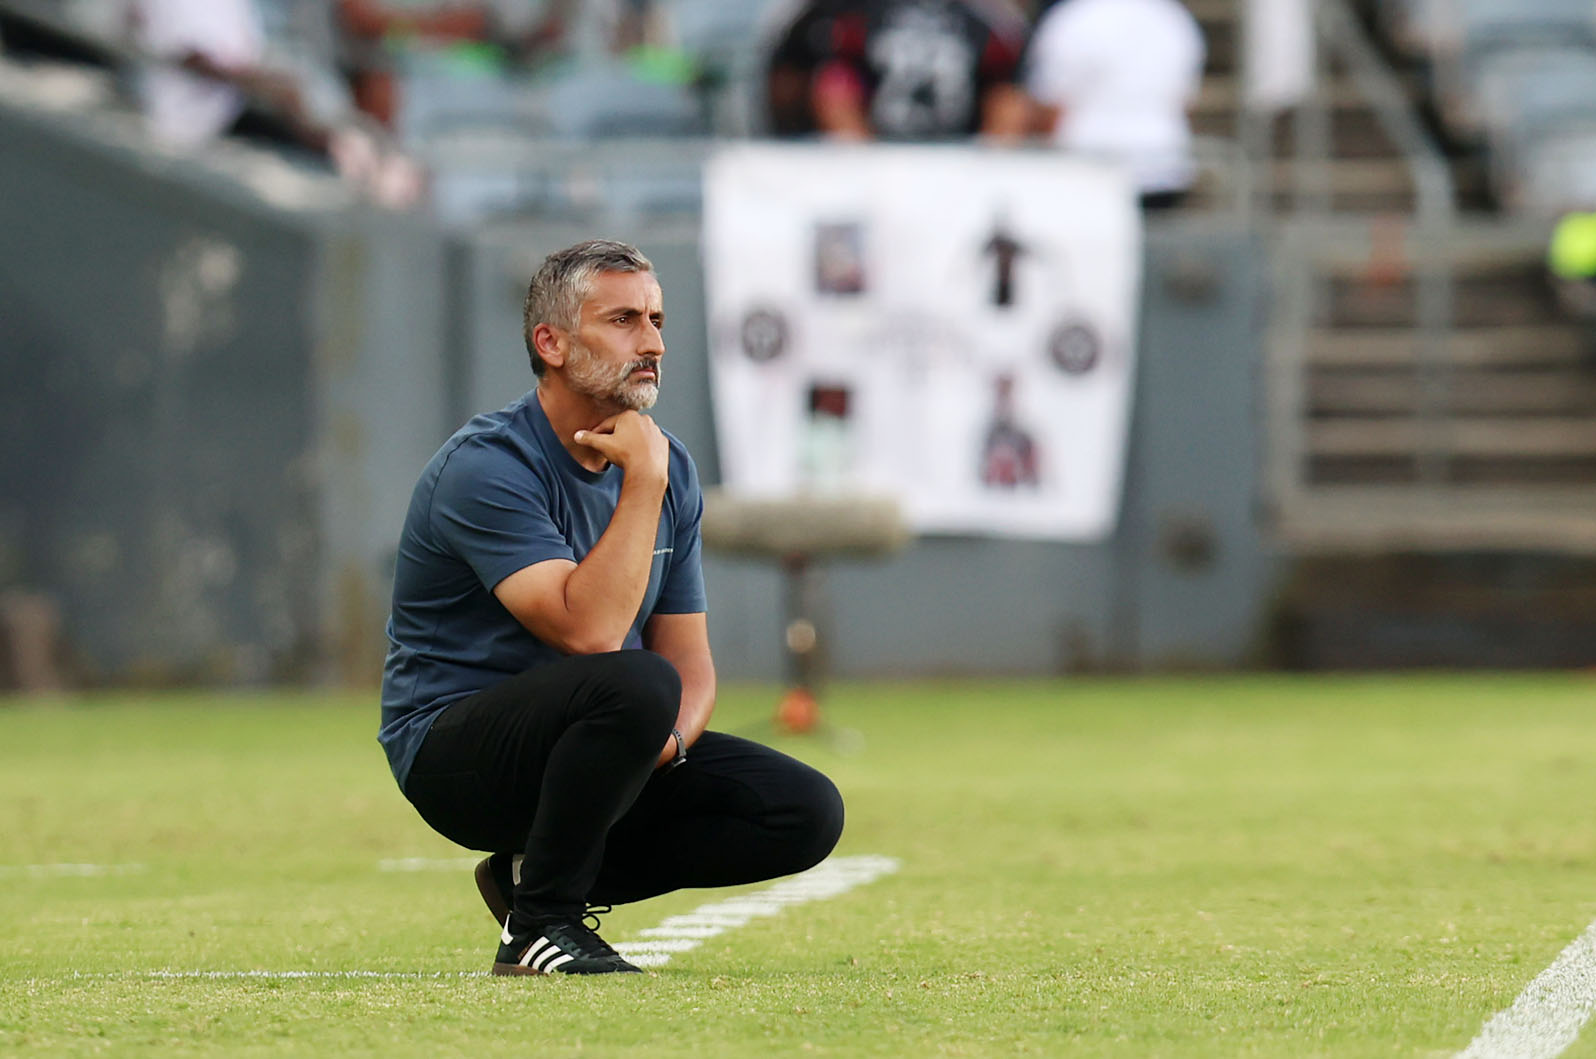 Pirates coach hopeful to finish on position two